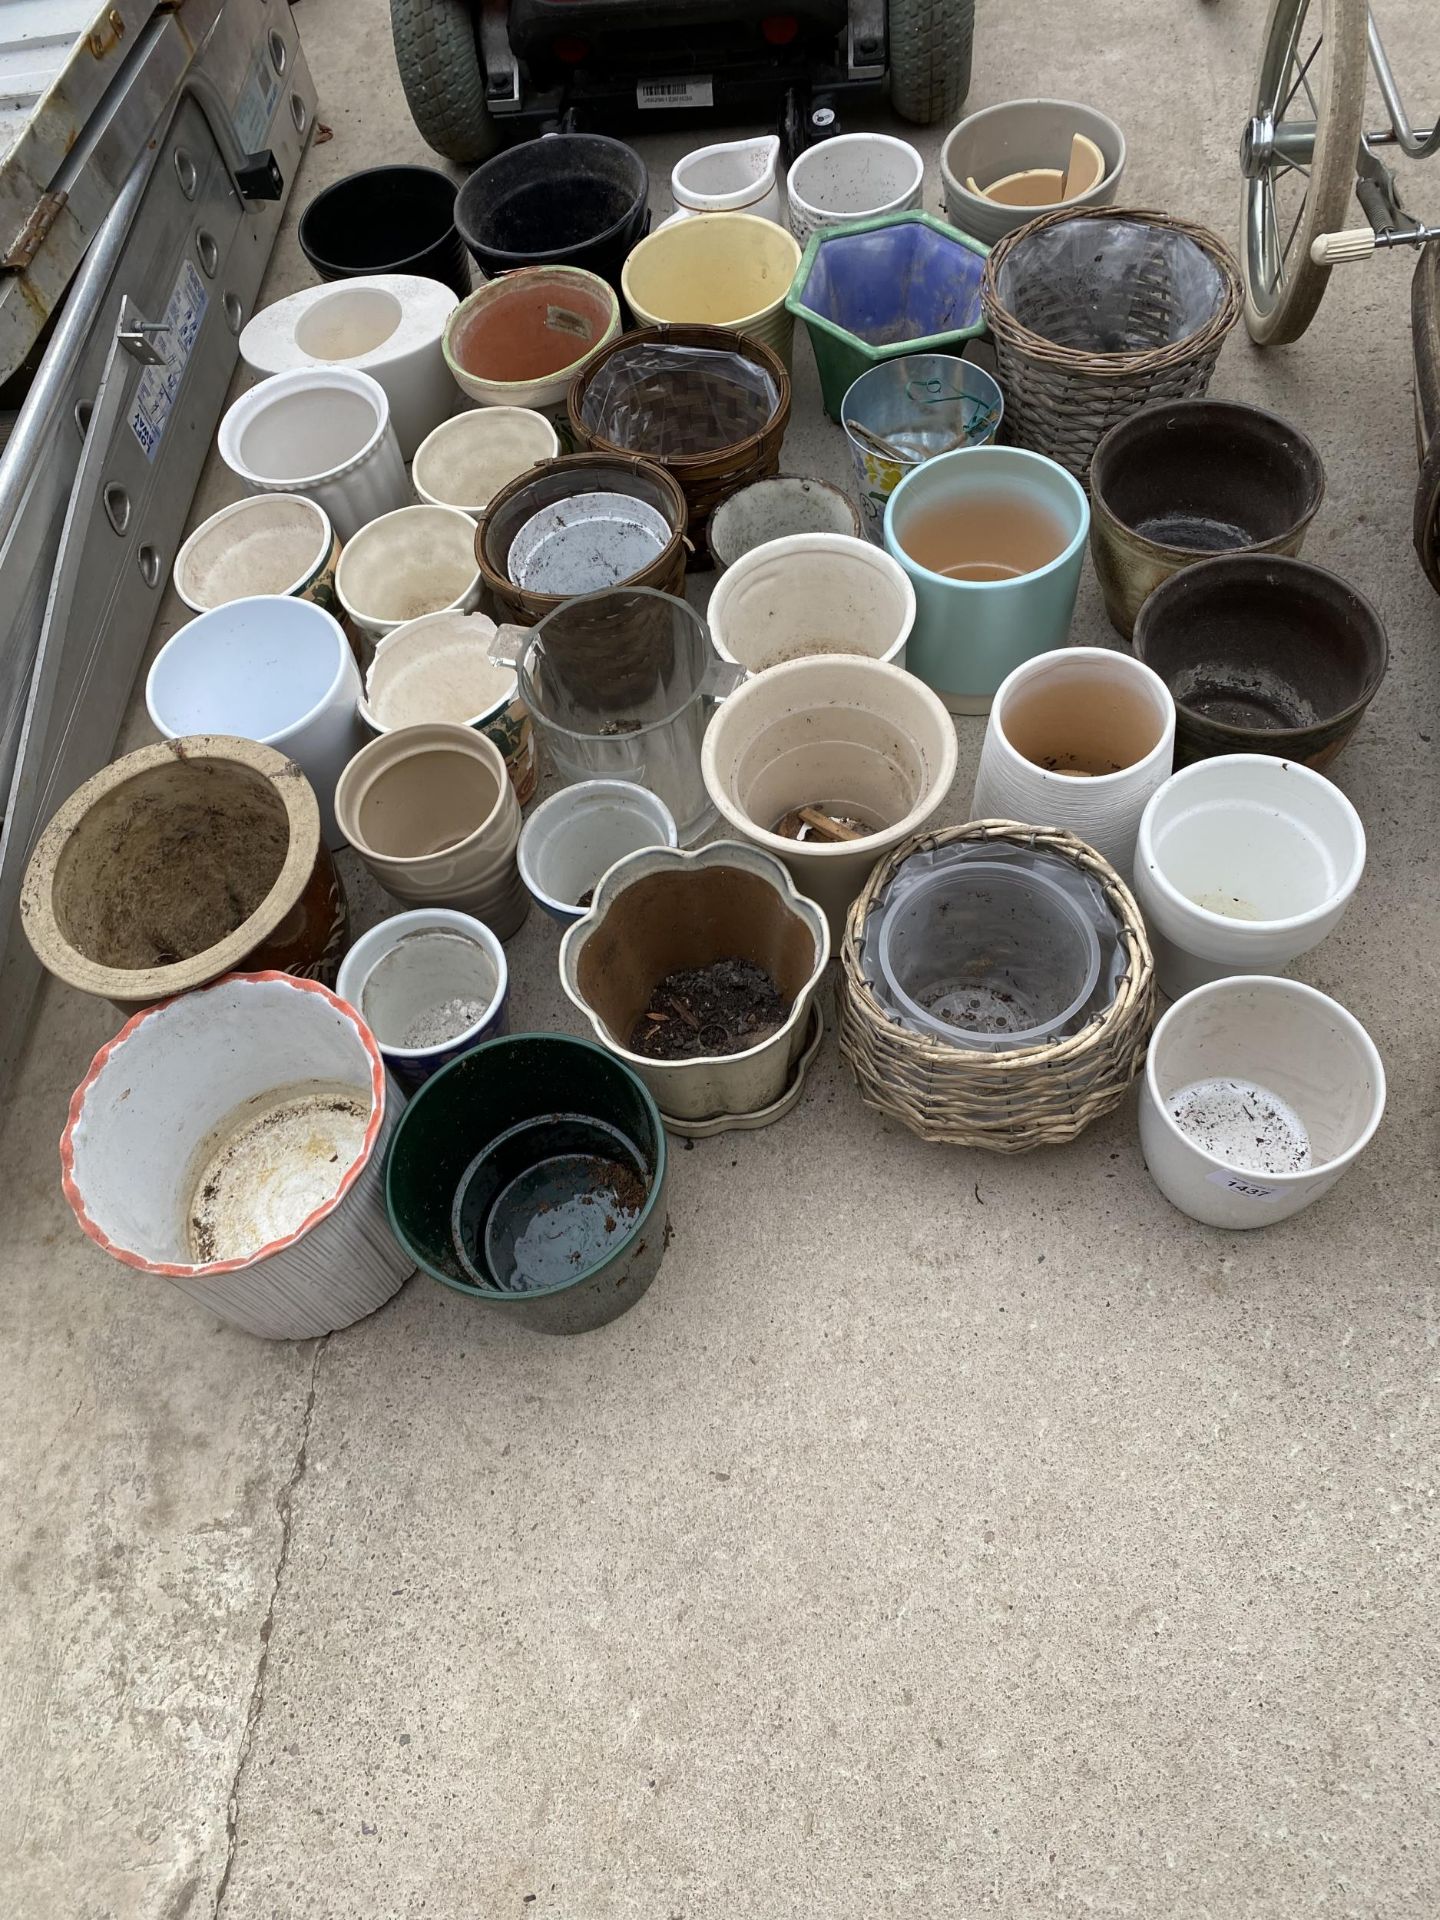 A LARGE QUANTITY OF CERAMIC AND WICKER PLANT POTS